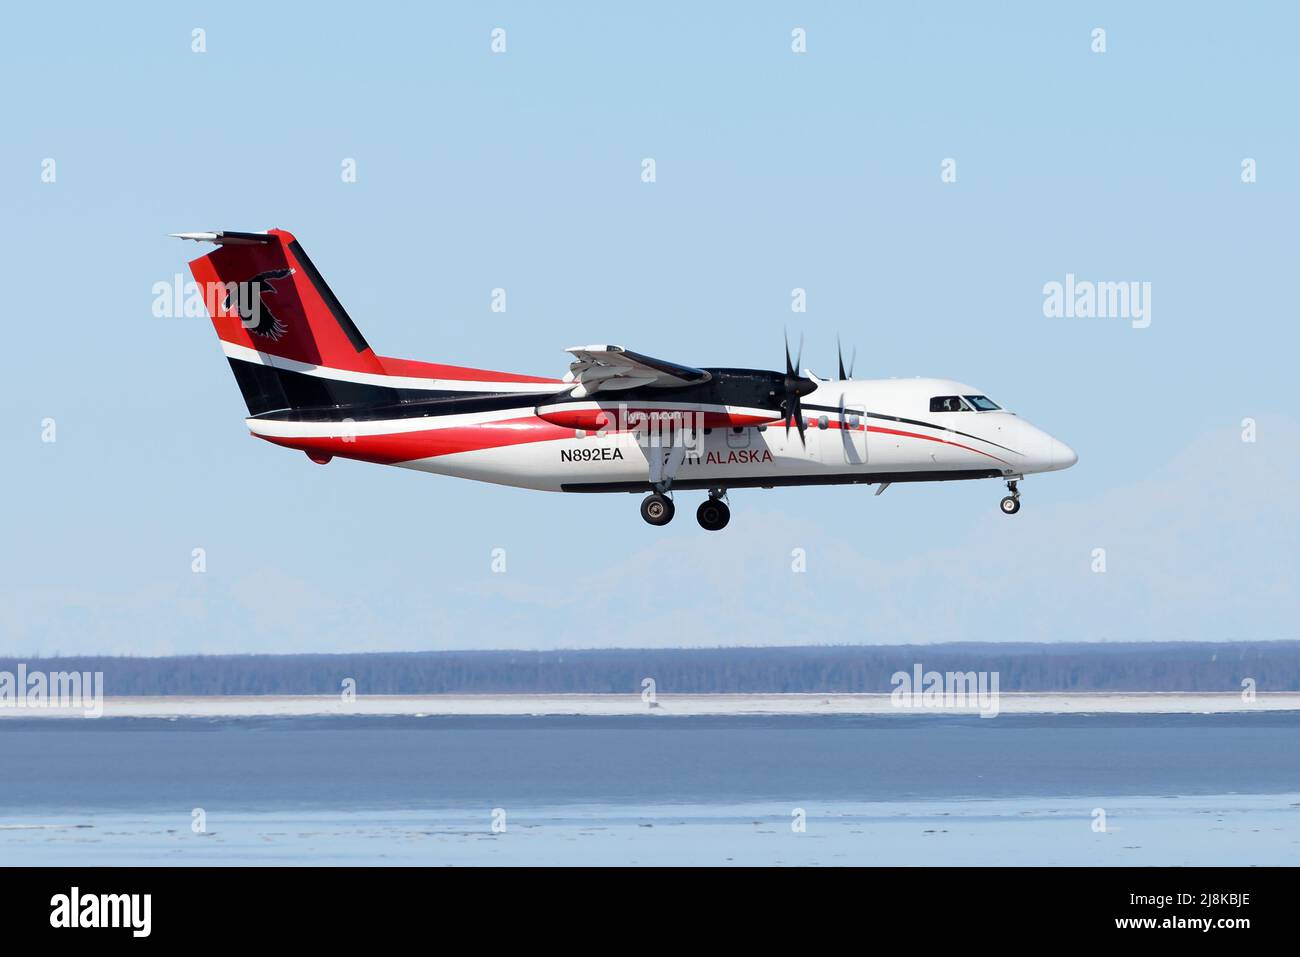 Ravn Alaska DHC-8 aircraft. Small regional airline with.  Bombardier Dash 8 of Ravn Alaska. N892EA. Stock Photo